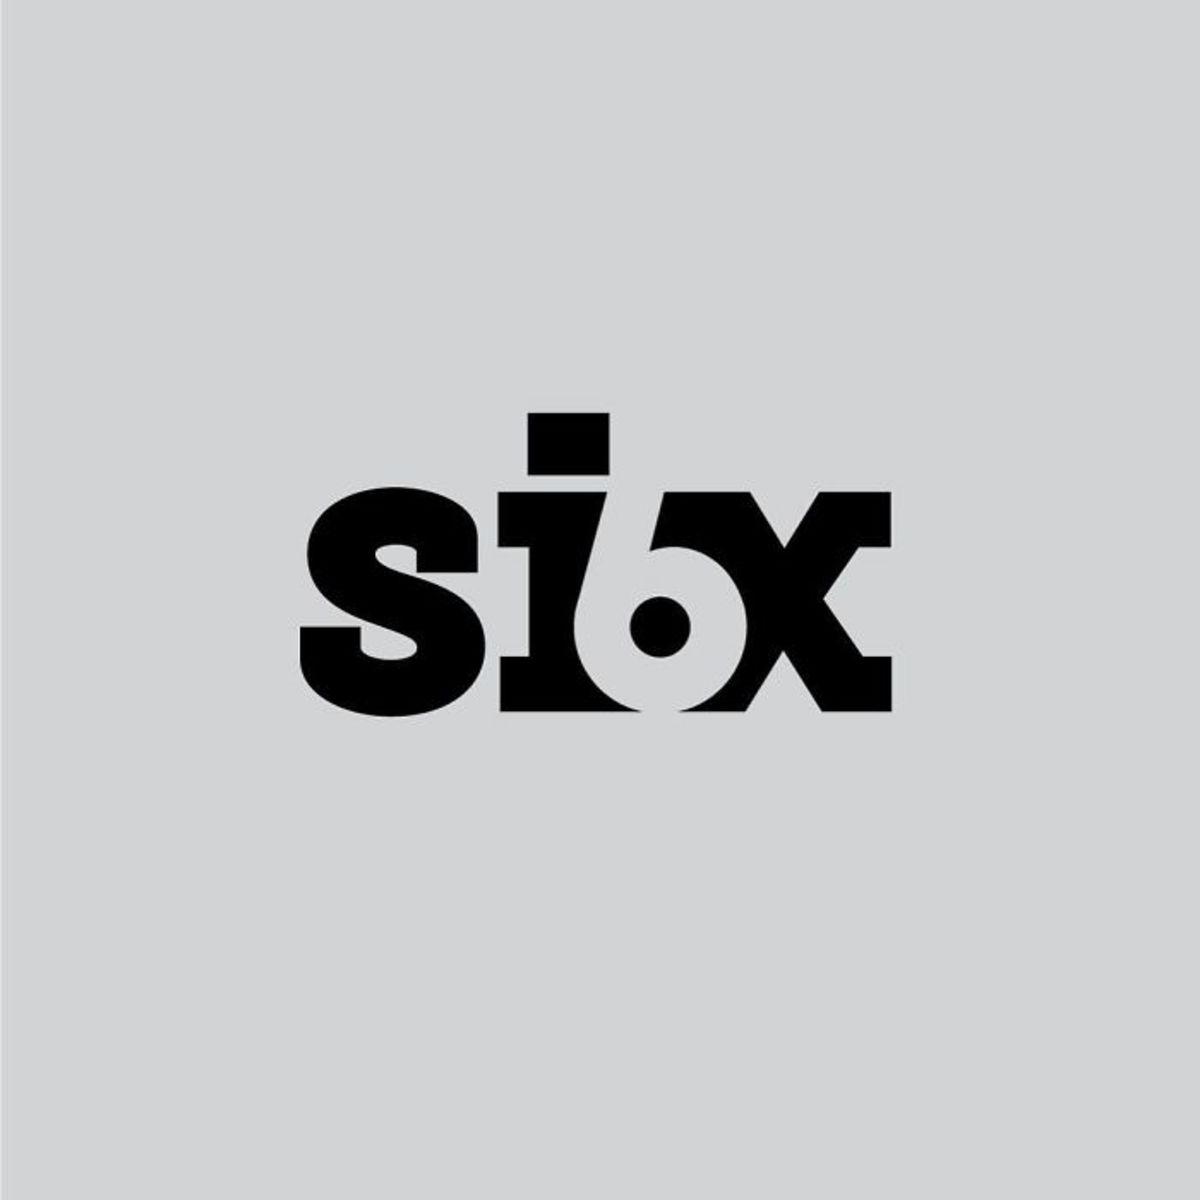 Six -Word Logo - Designer Challenges Himself To Create A Minimal Logo For A Word ...